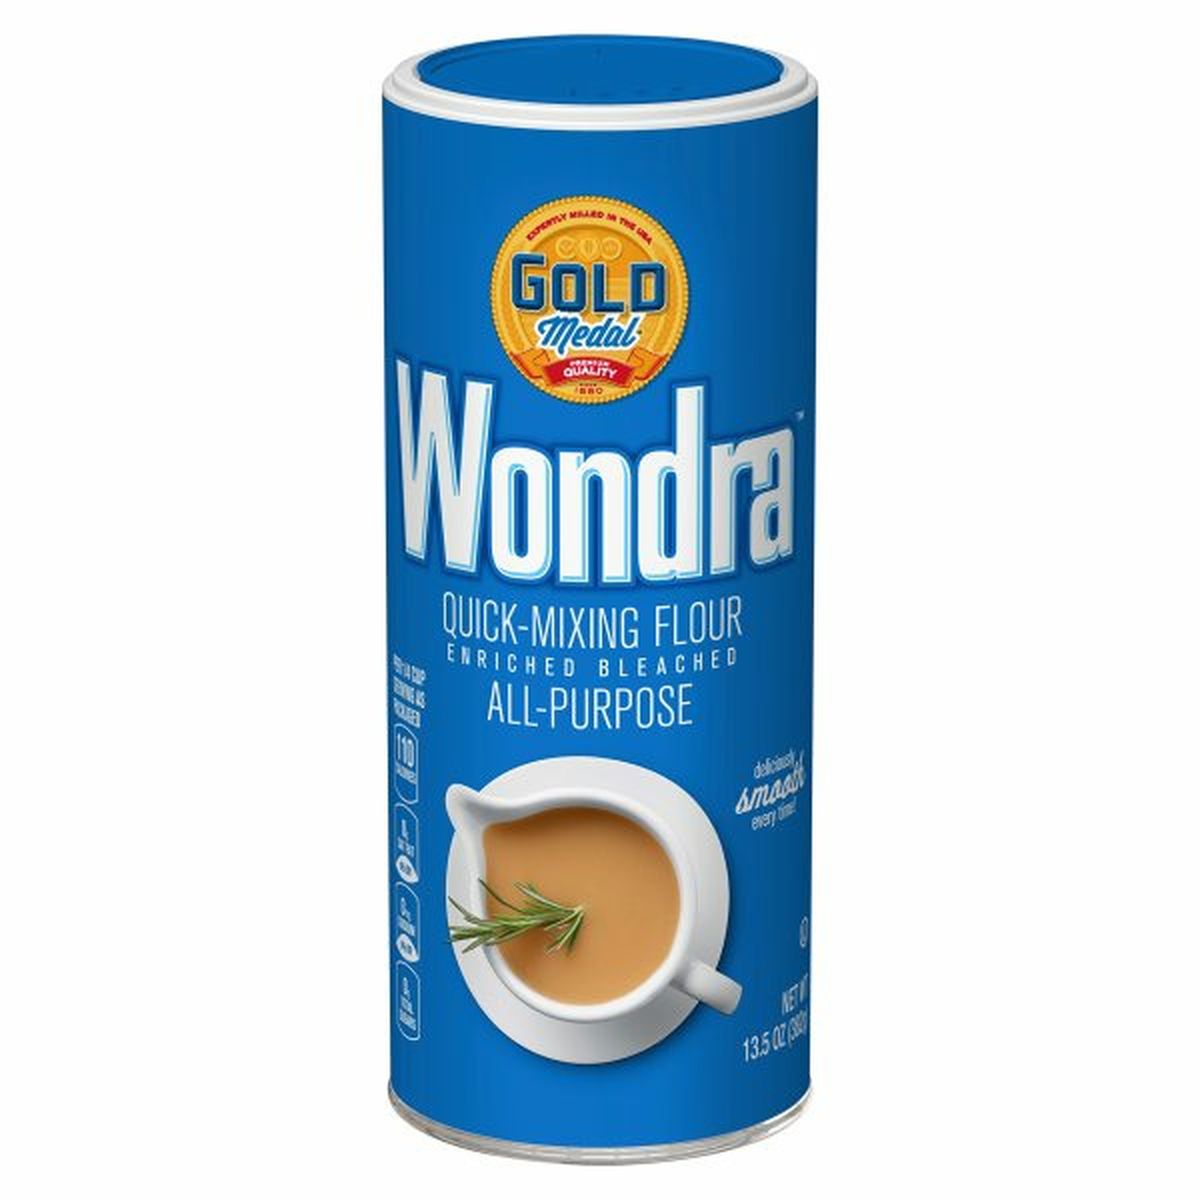 Calories in Gold Medal Wondra Flour, Quick-Mixing, Bleached, Enriched, All-Purpose